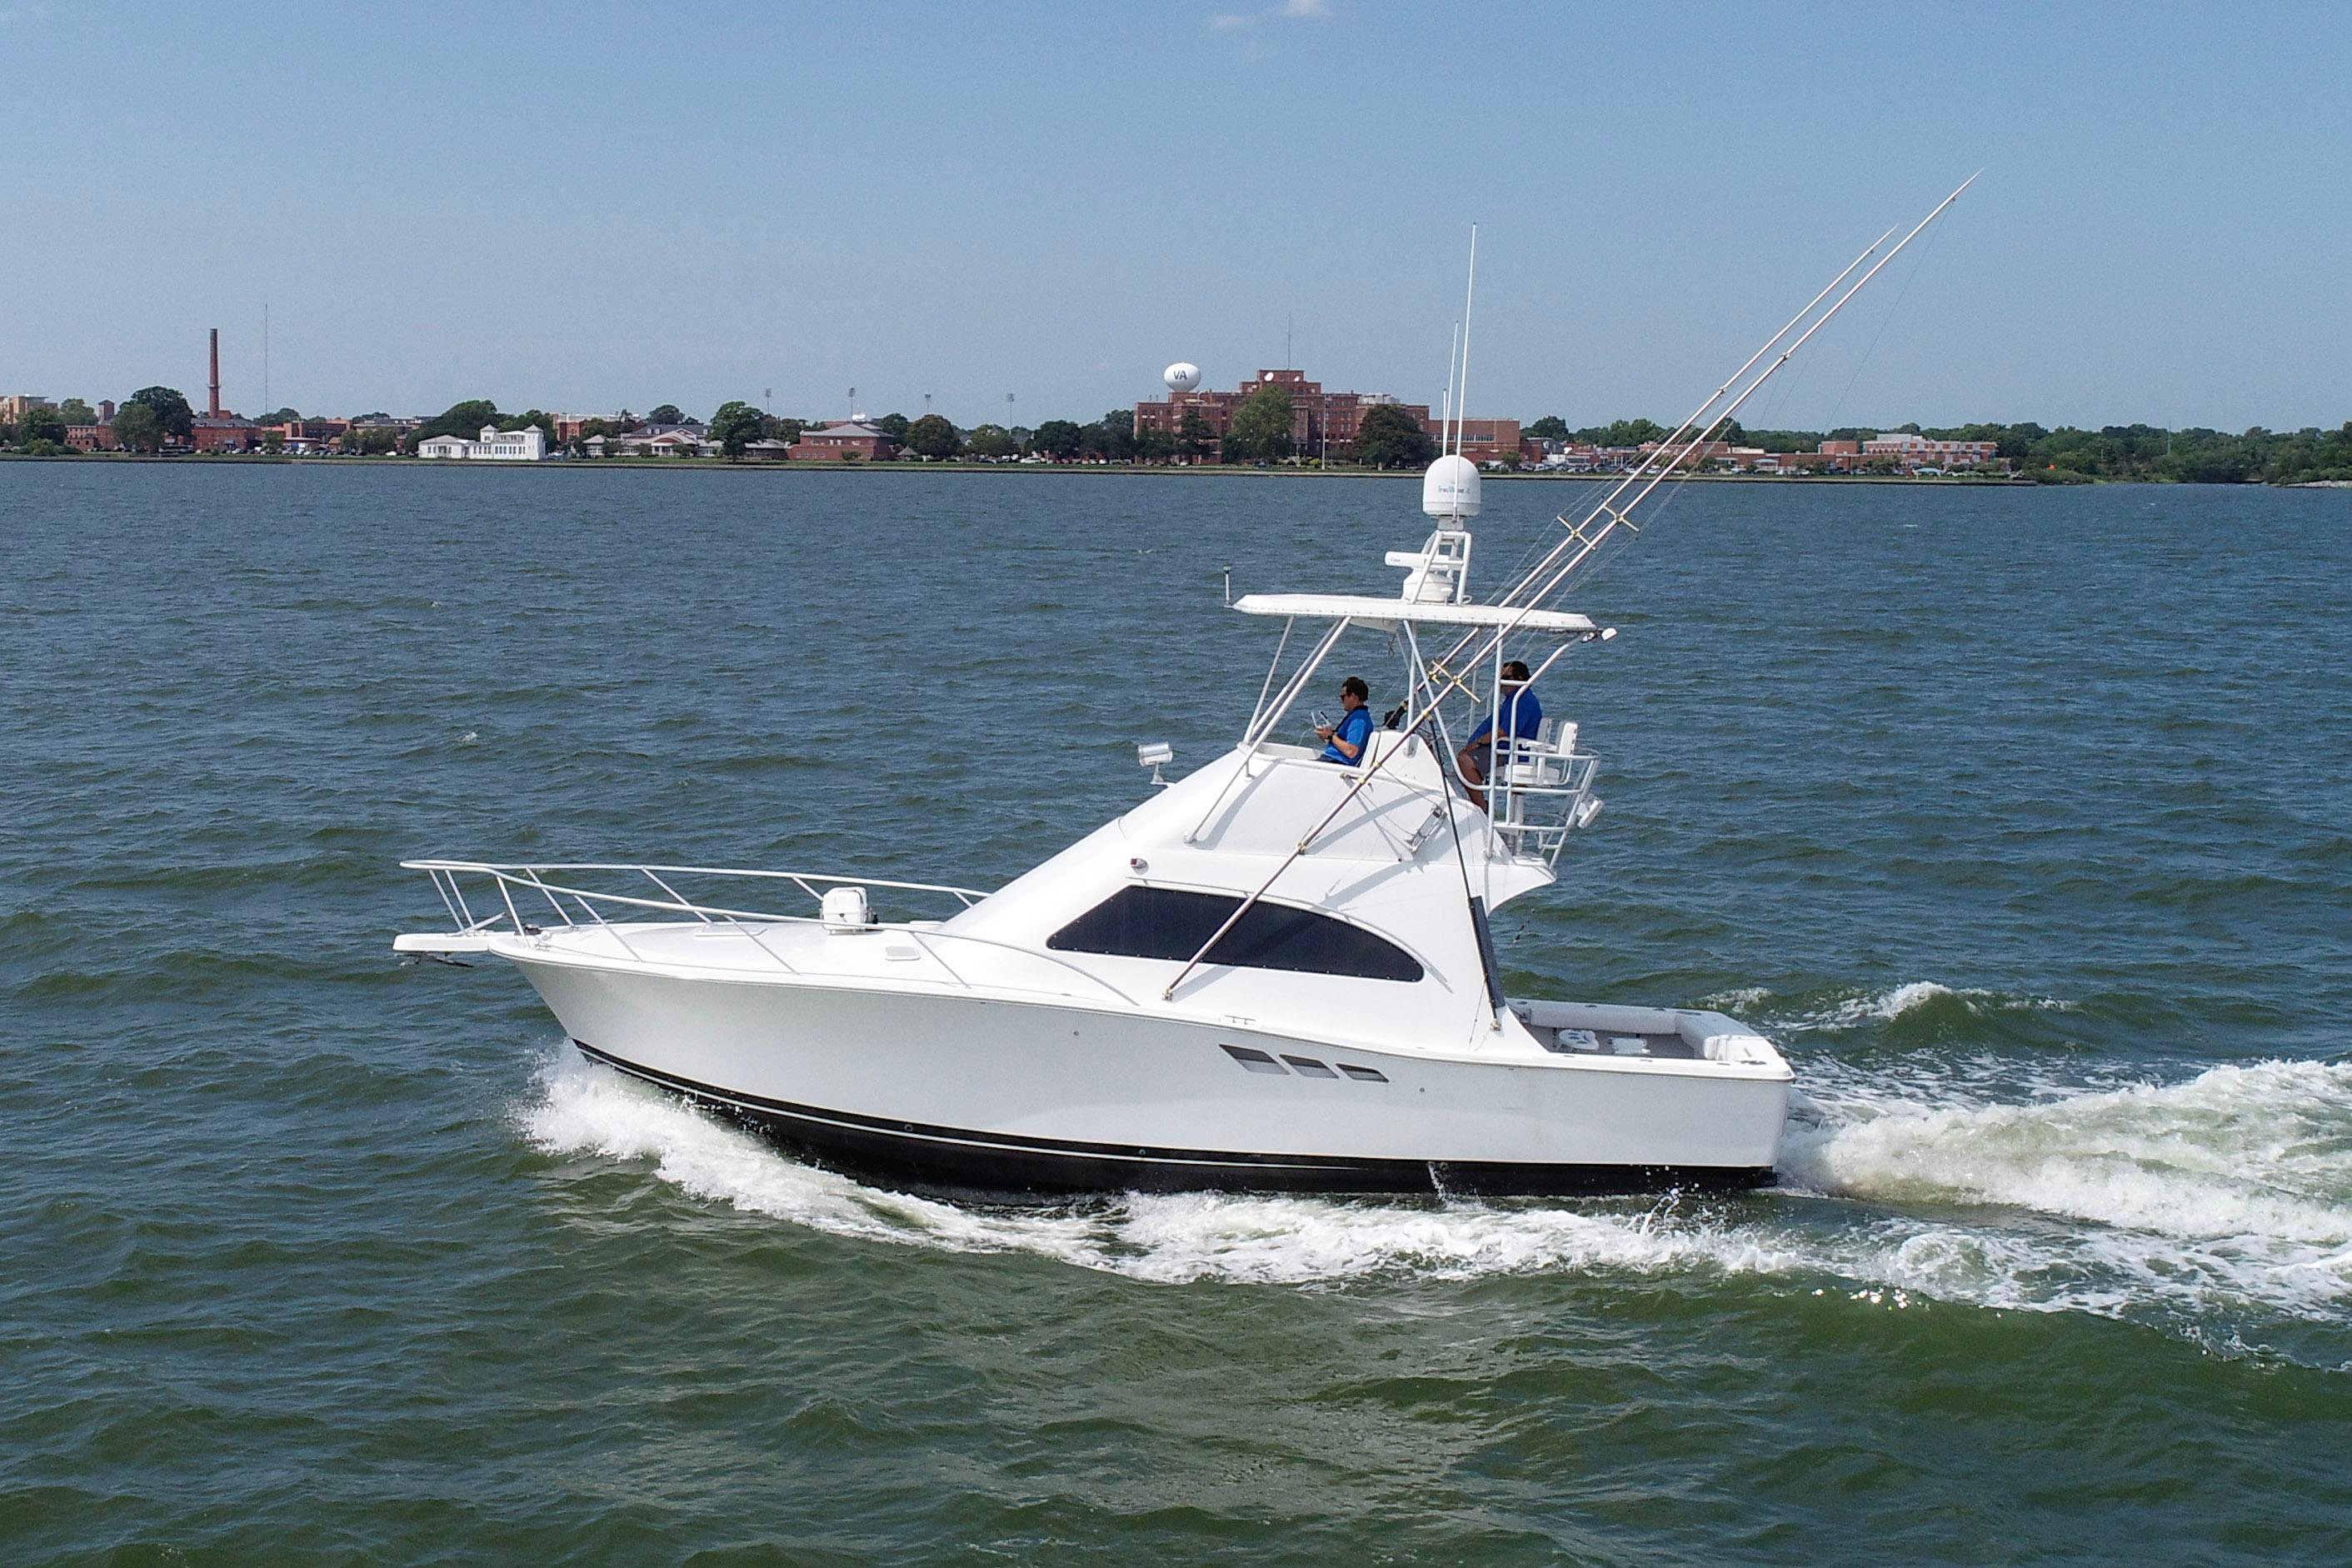 Luhrs 36 Convertible boats for sale